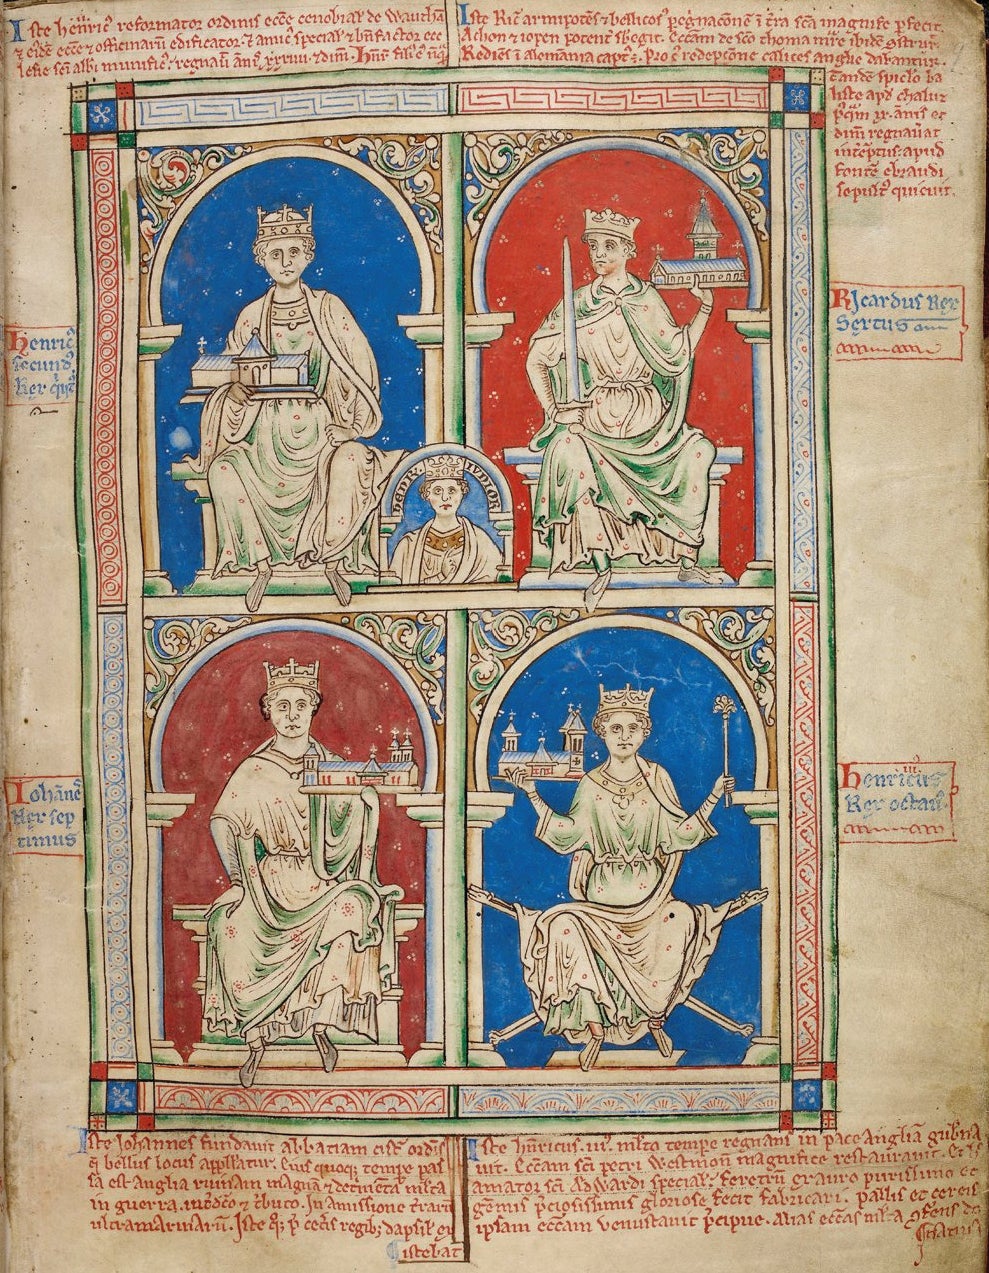 Three generations of restless kings – Henry II (top left), his sons Richard I (top right) and John (bottom left), and grandson Henry III (bottom right). Inset is a depiction of the young Henry, crowned as king of England in his father Henry II’s lifetime but never granted any power